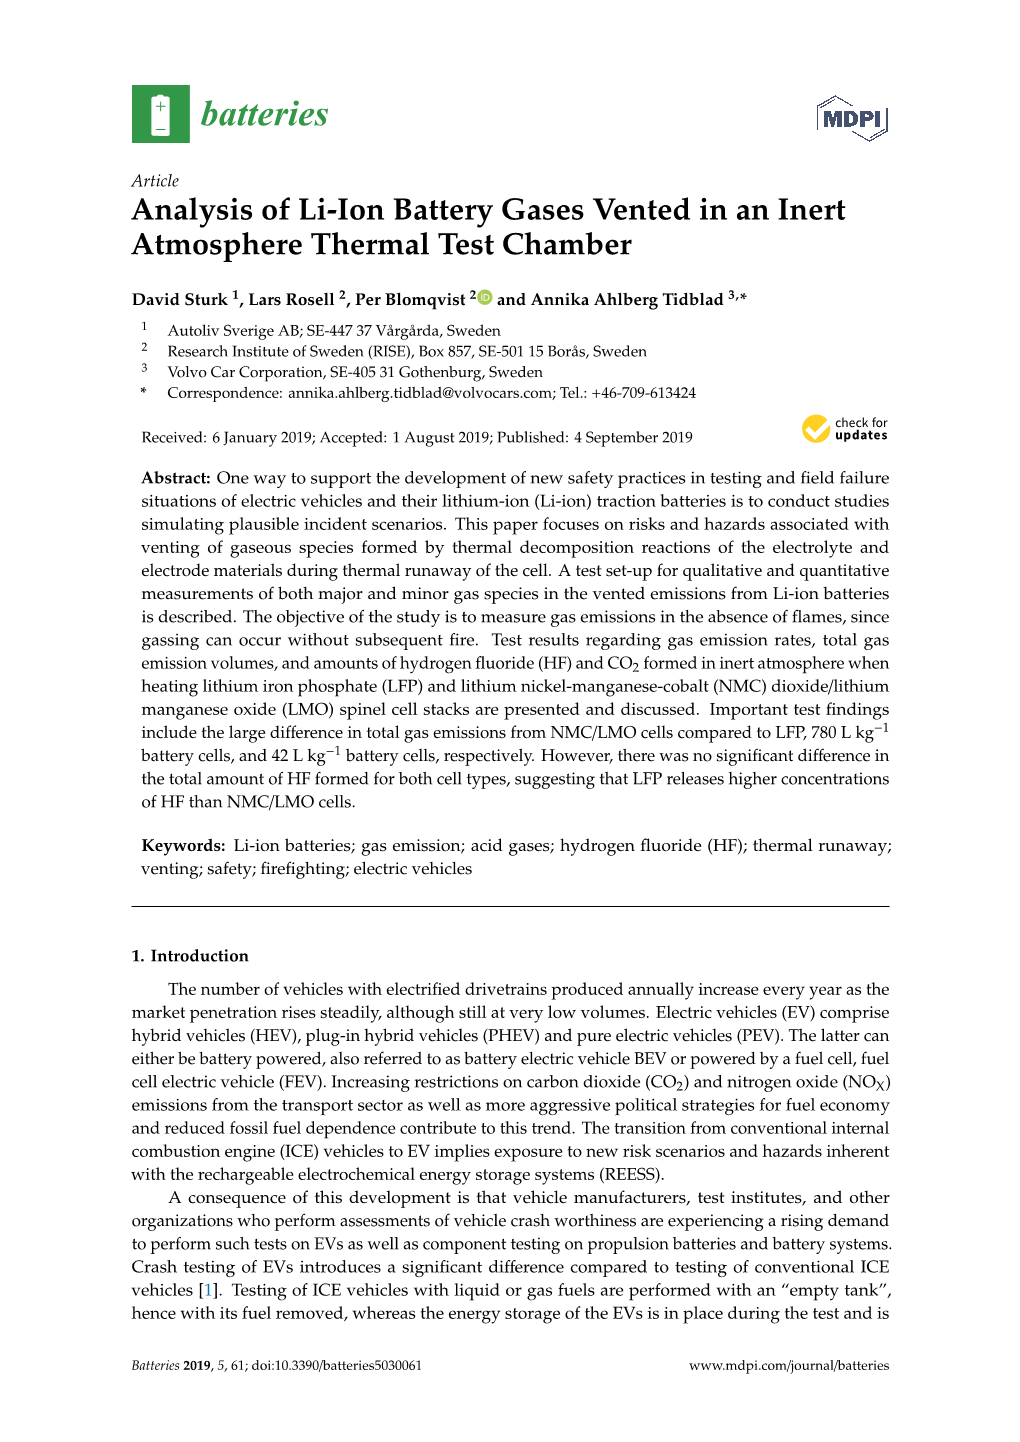 Analysis of Li-Ion Battery Gases Vented in an Inert Atmosphere Thermal Test Chamber